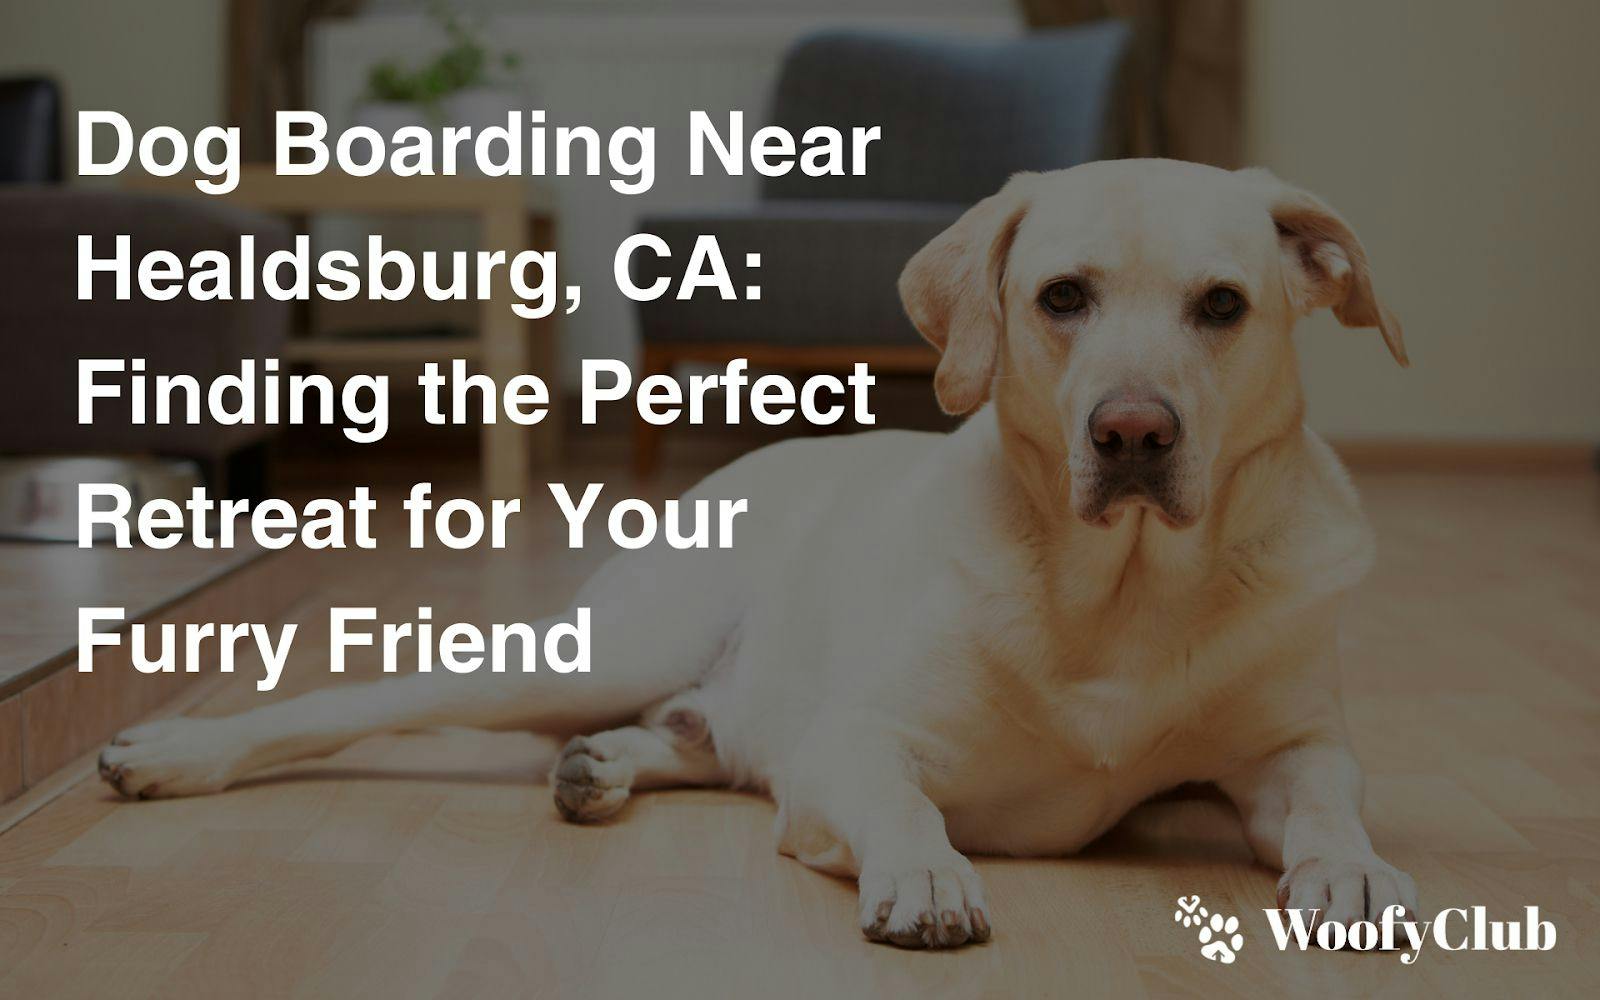 Dog Boarding Near Healdsburg, CA: Finding The Perfect Retreat For Your Furry Friend